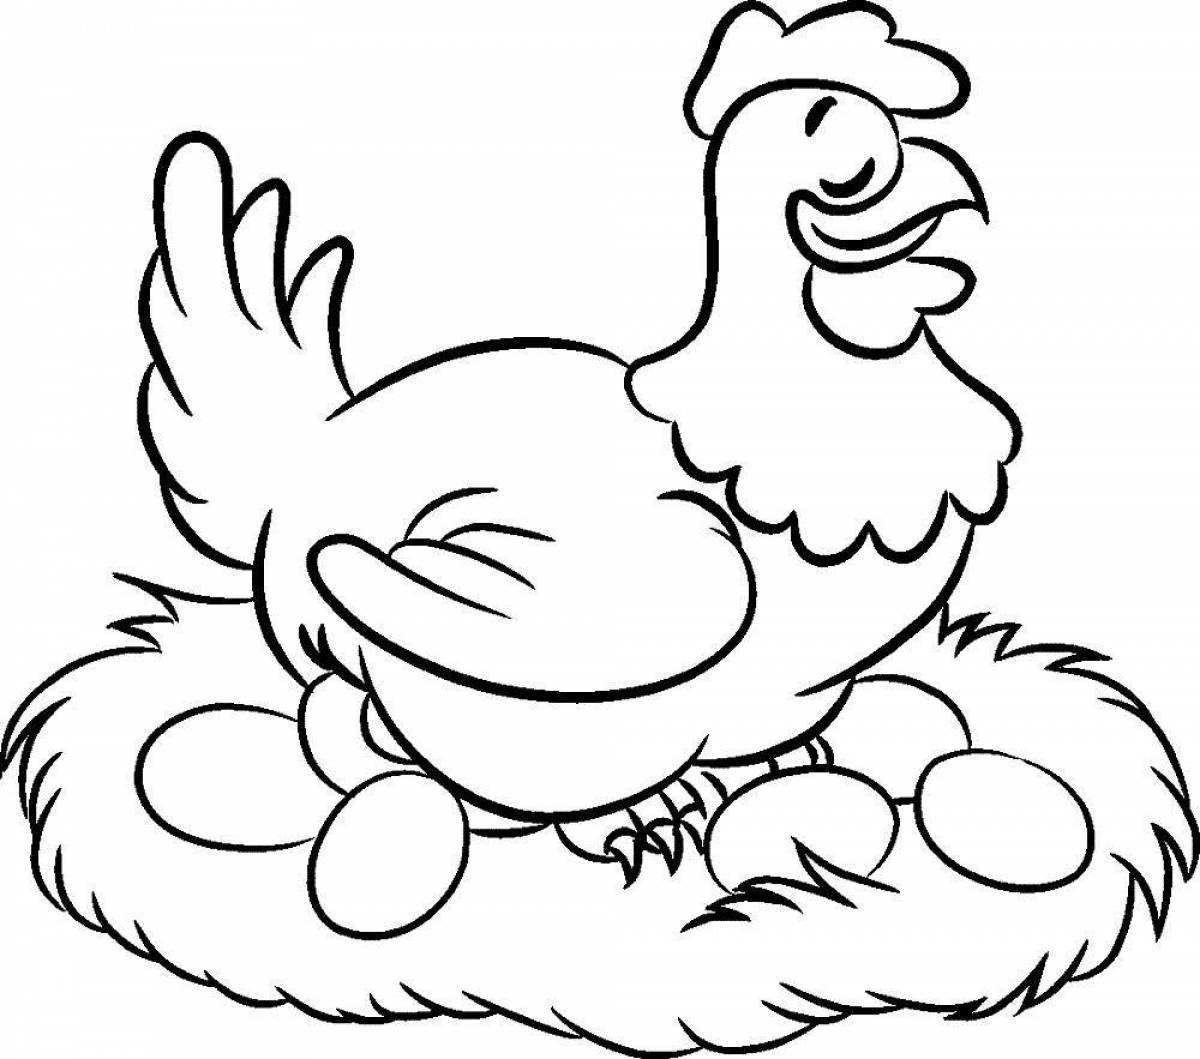 Wonderful chick pockmarked coloring book for children